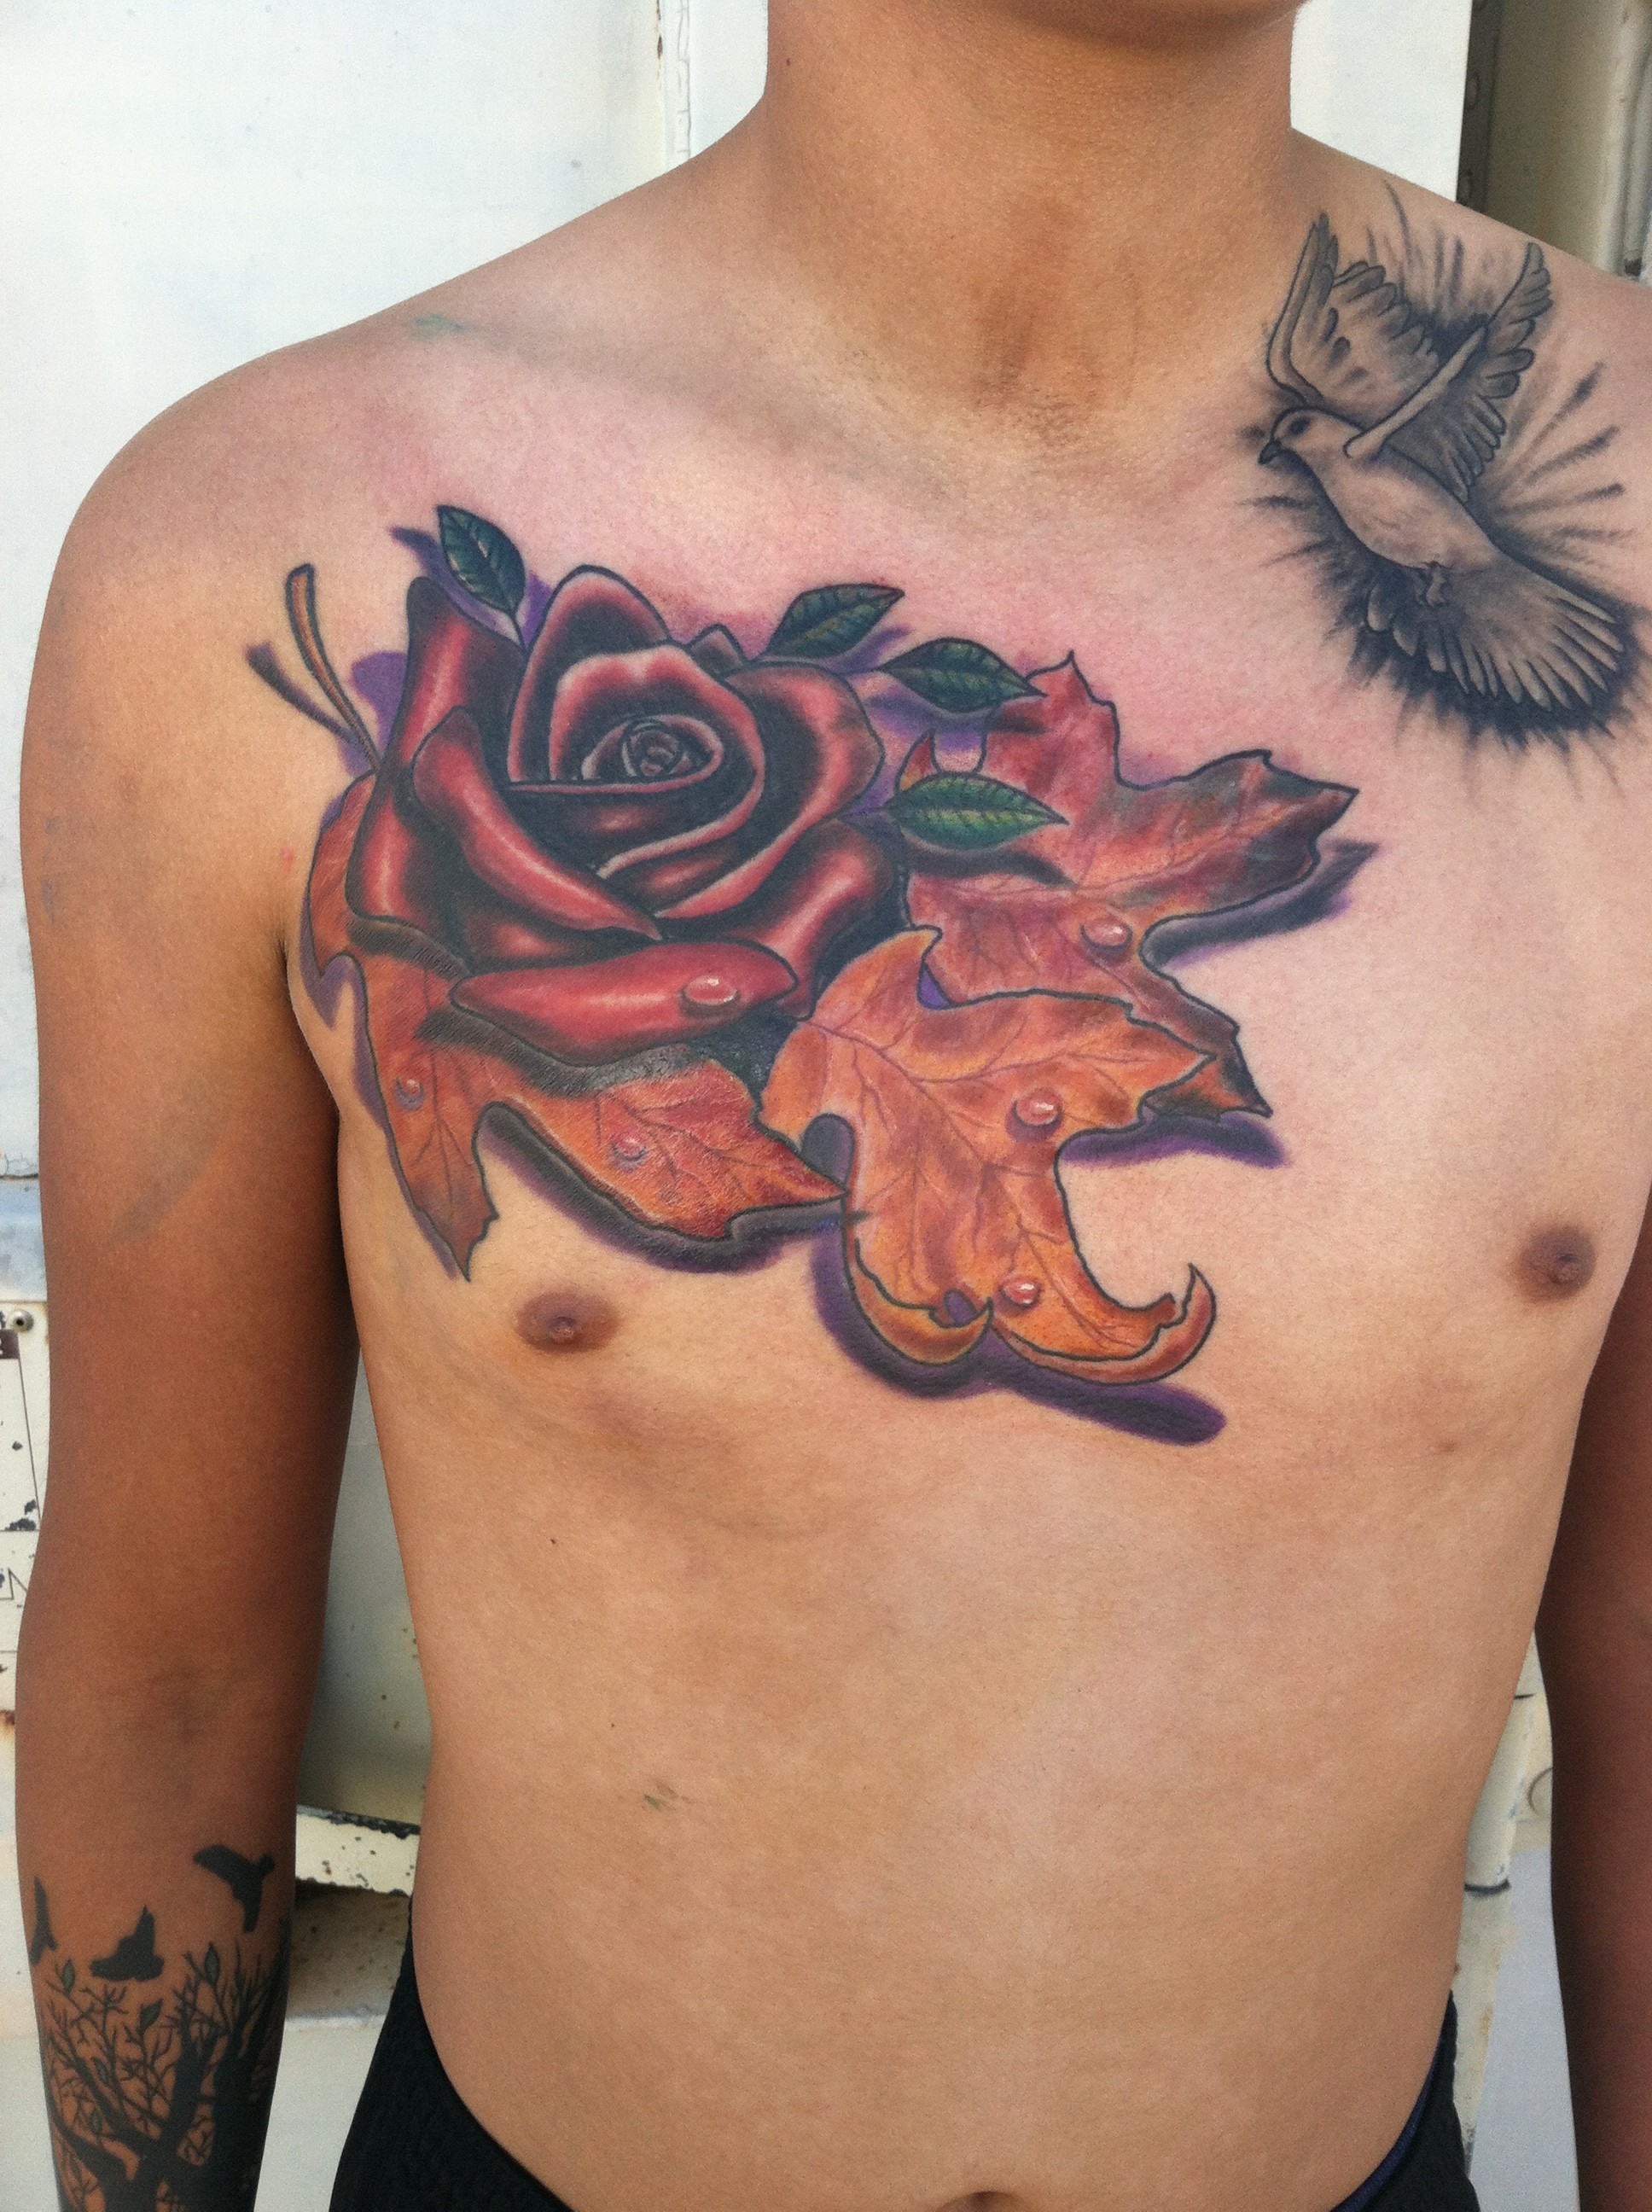 Tough masculine Rose and autumn fall leaves chest color tattoo by David Meek at Fast Lane Tattoo in Tucson Arizona